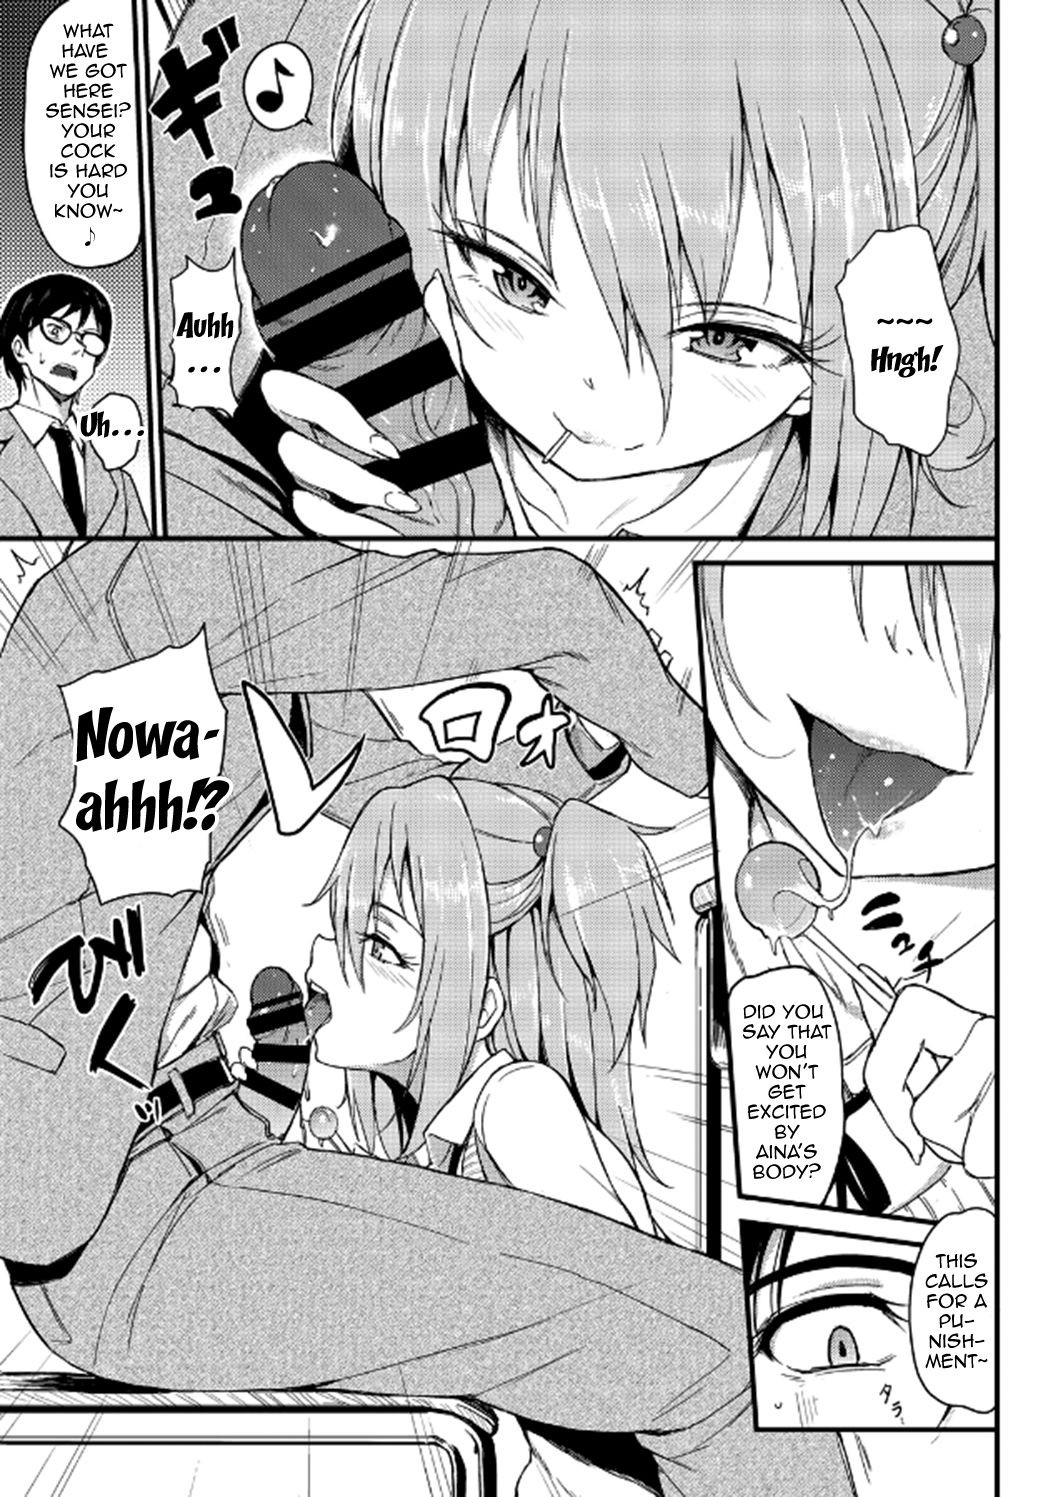 Lovely Aina-chan - Chapter 1 porn comic picture 7